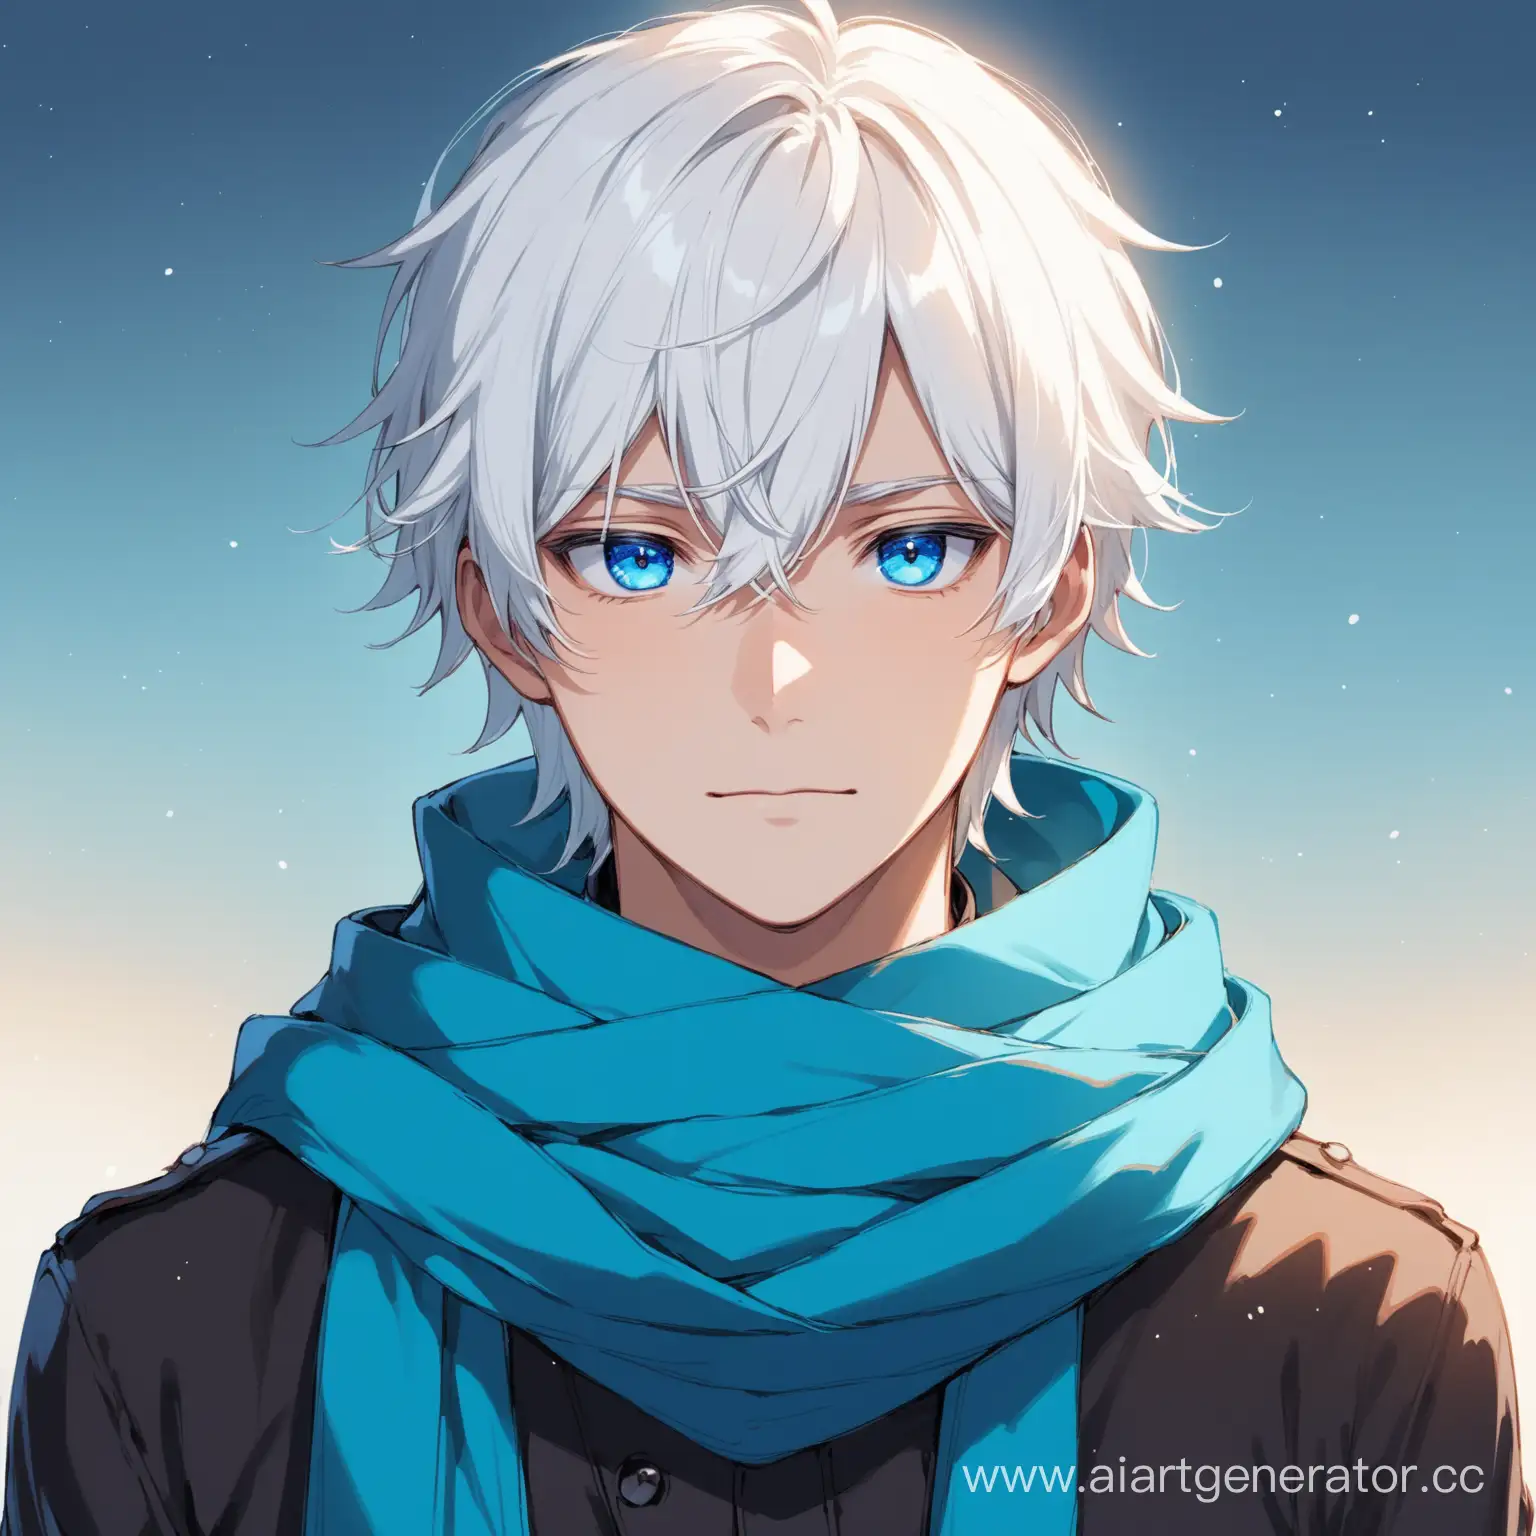 guy, solo, white hair, blue eyes, blue scarf in eye color, calm face